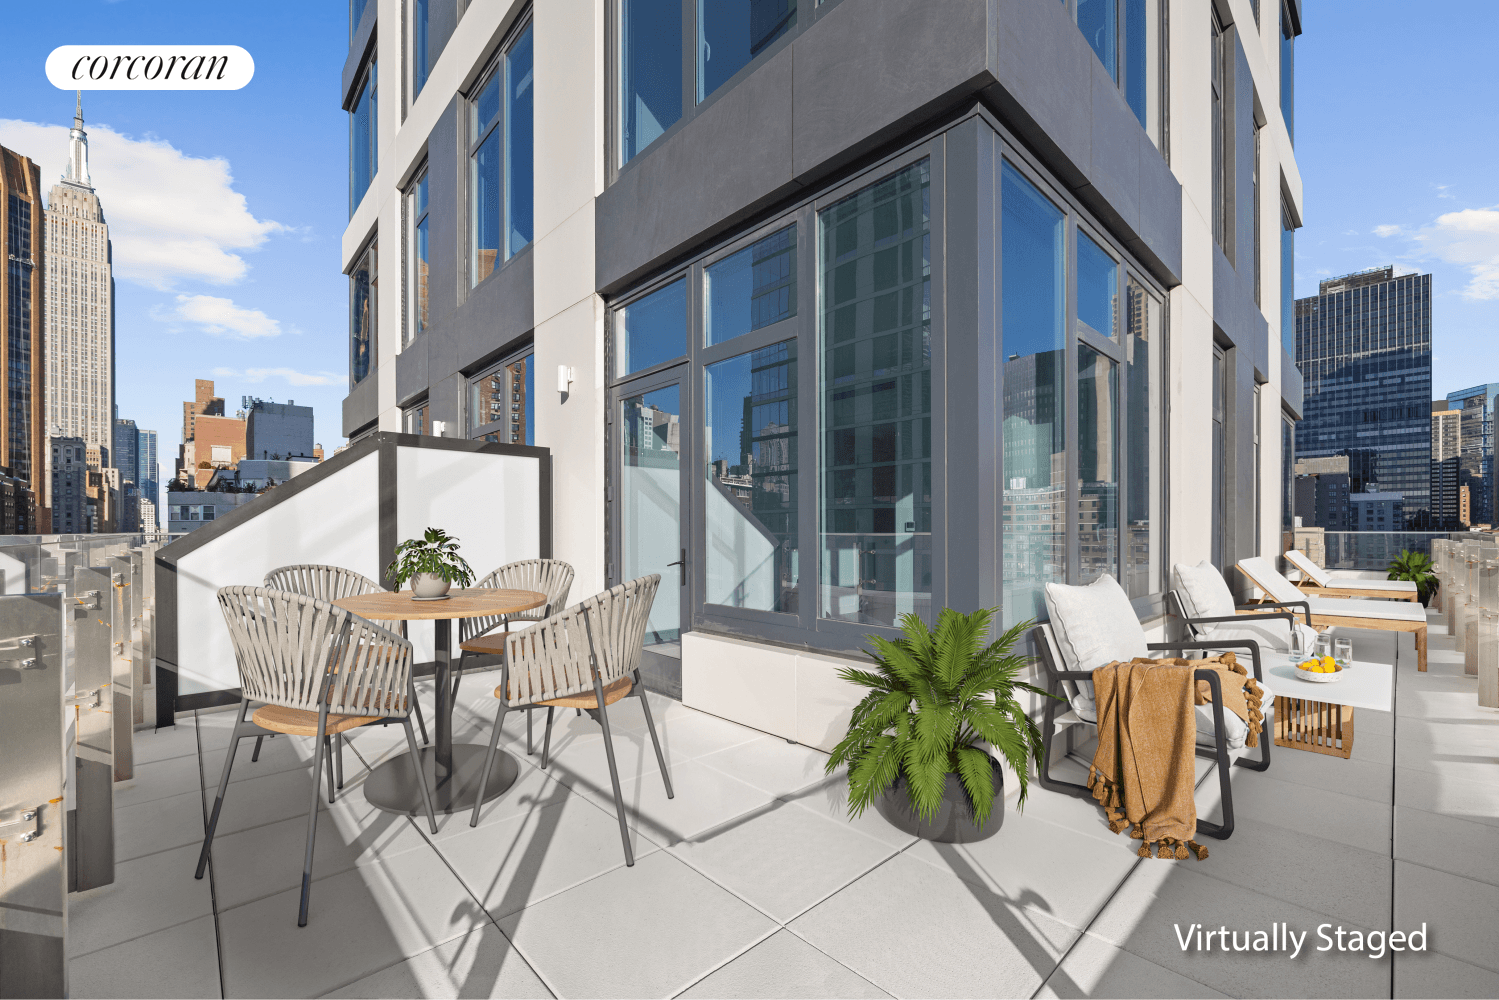 Welcome to Residence C, a corner unit alcove studio with a private wrap terrace facing southwest, featuring remarkable unobstructed city and Empire State views.